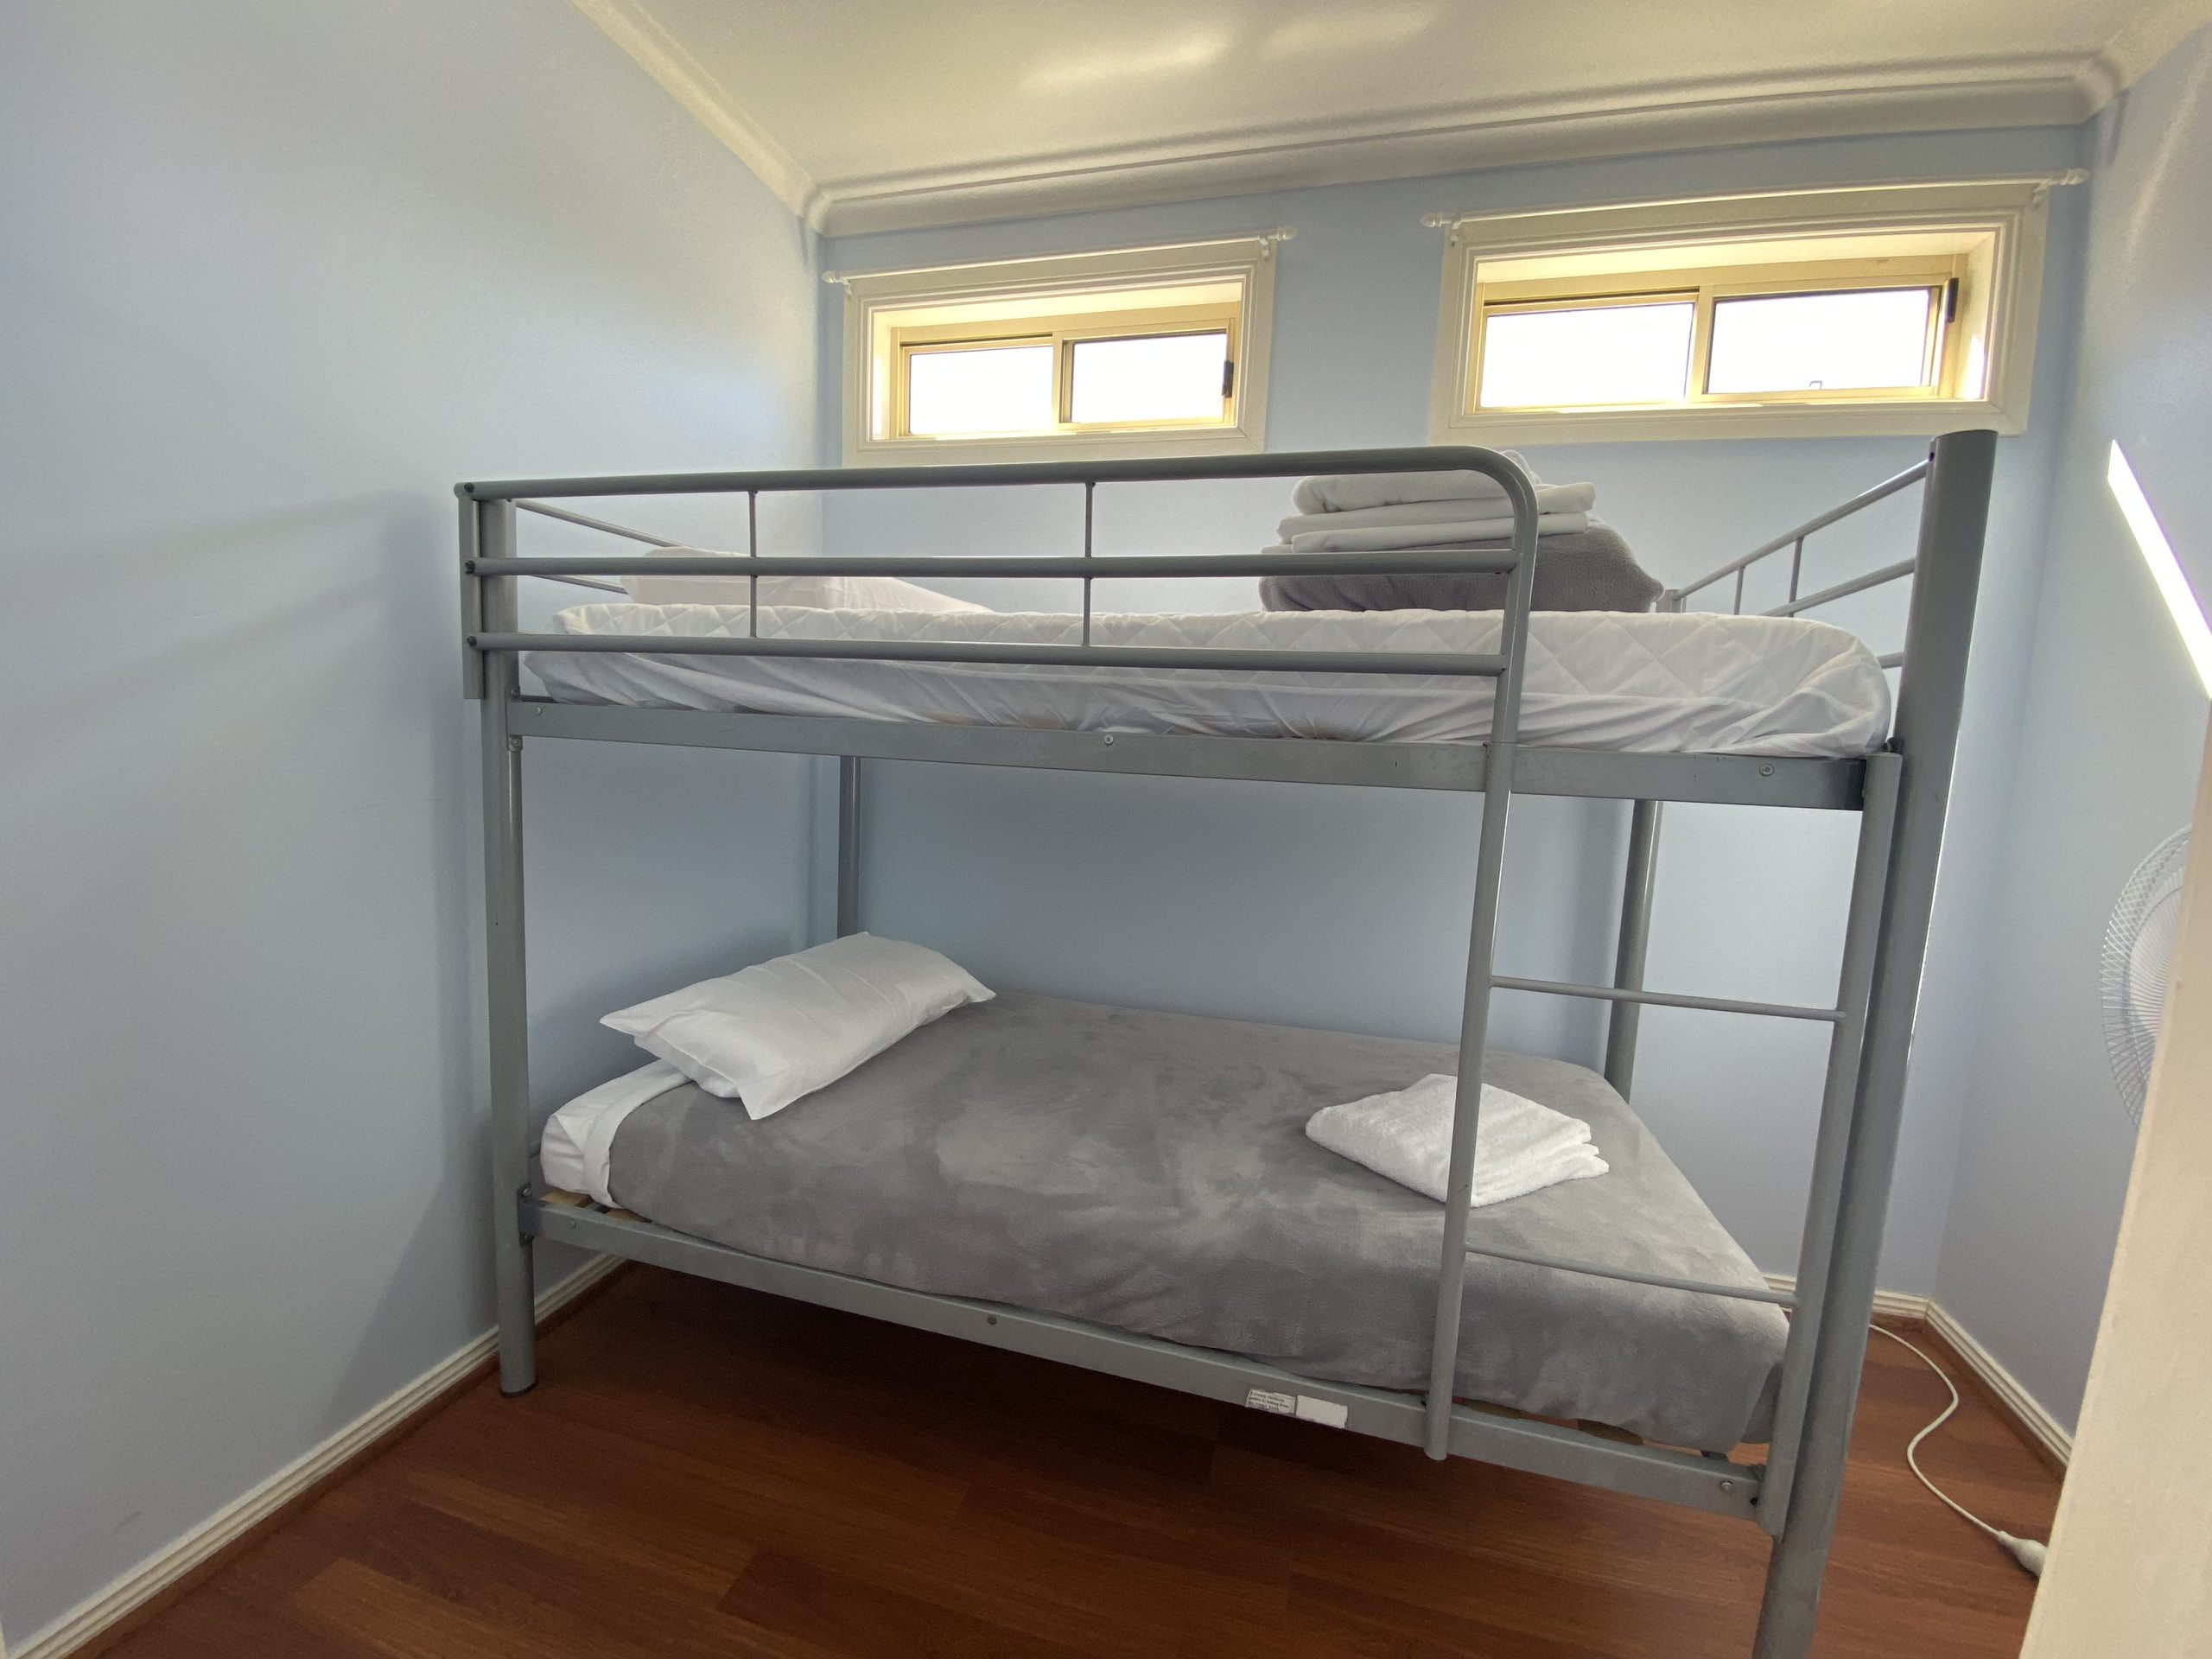 standard-family-cabin-bunk-beds